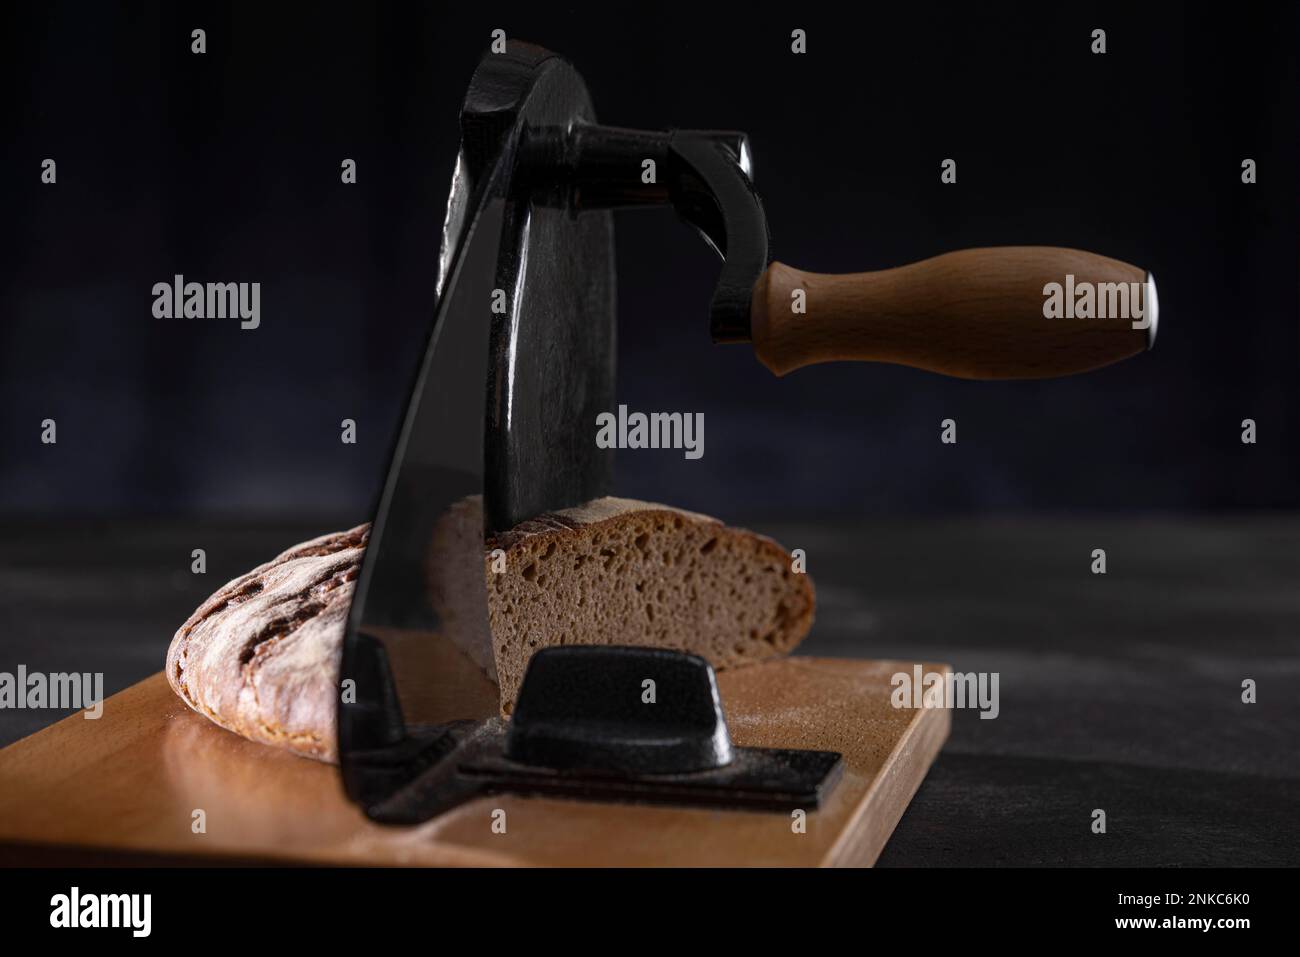 https://c8.alamy.com/comp/2NKC6K0/mixed-bread-with-hand-operated-bread-slicer-2NKC6K0.jpg